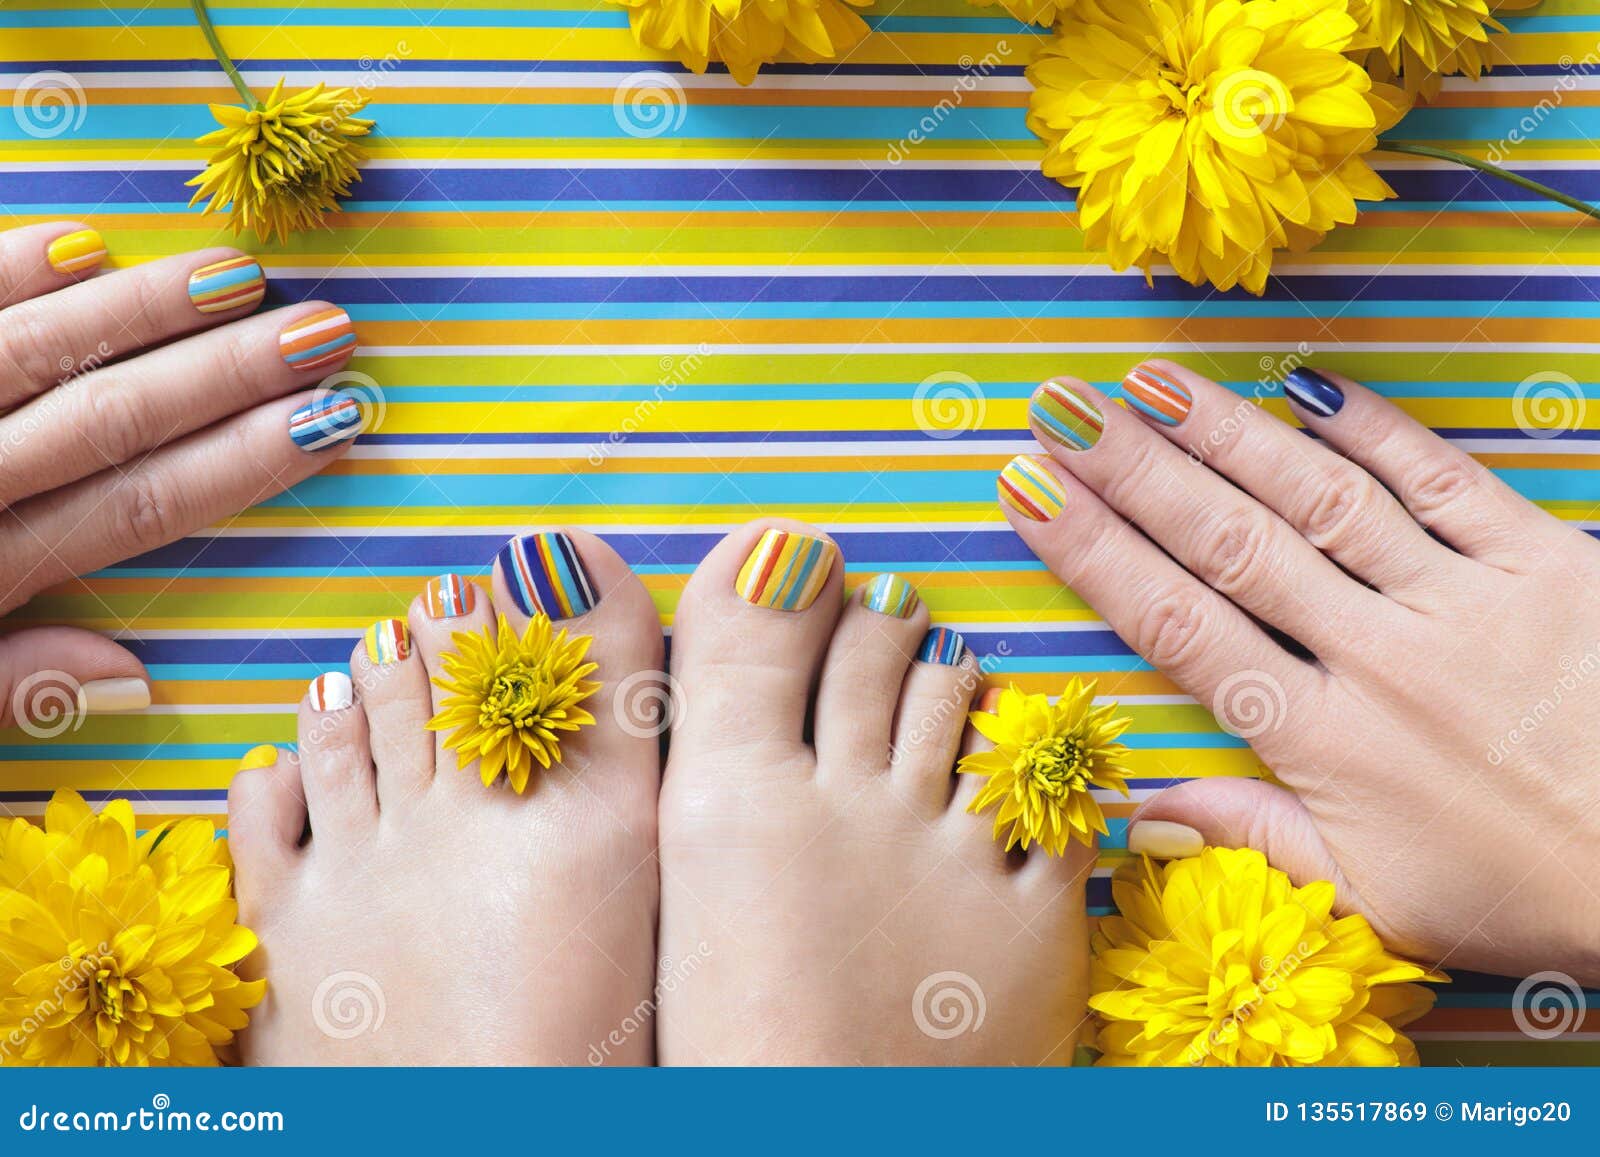 Colorful Striped Fashion Summer Pedicures And Manicures Stock Image Image Of Nail Orange 135517869